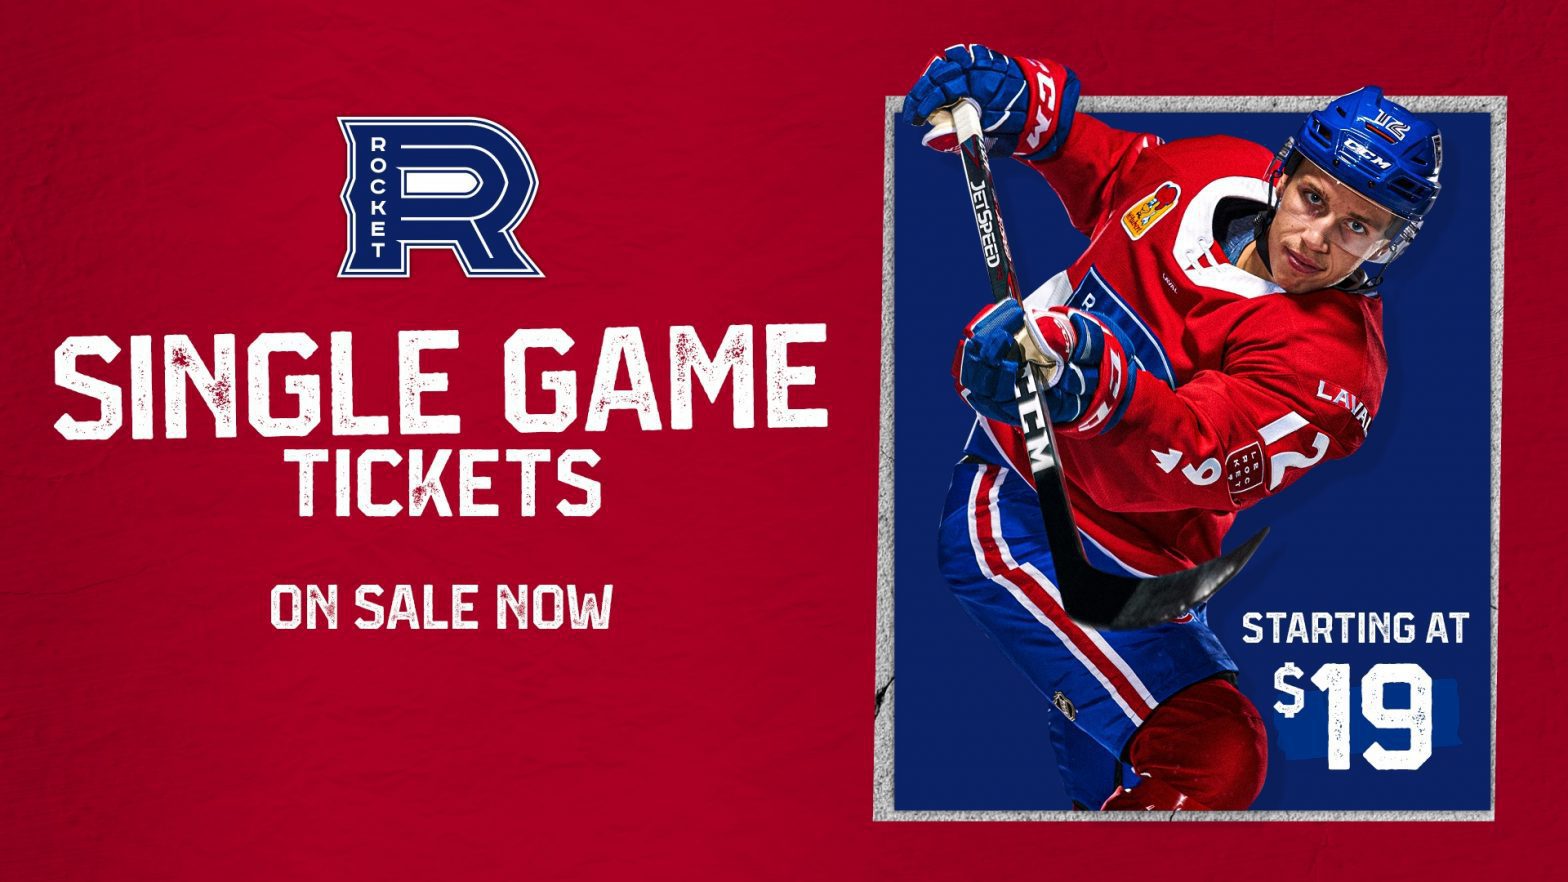 Canadiens unveil logo, jersey for new AHL affiliate Laval Rocket